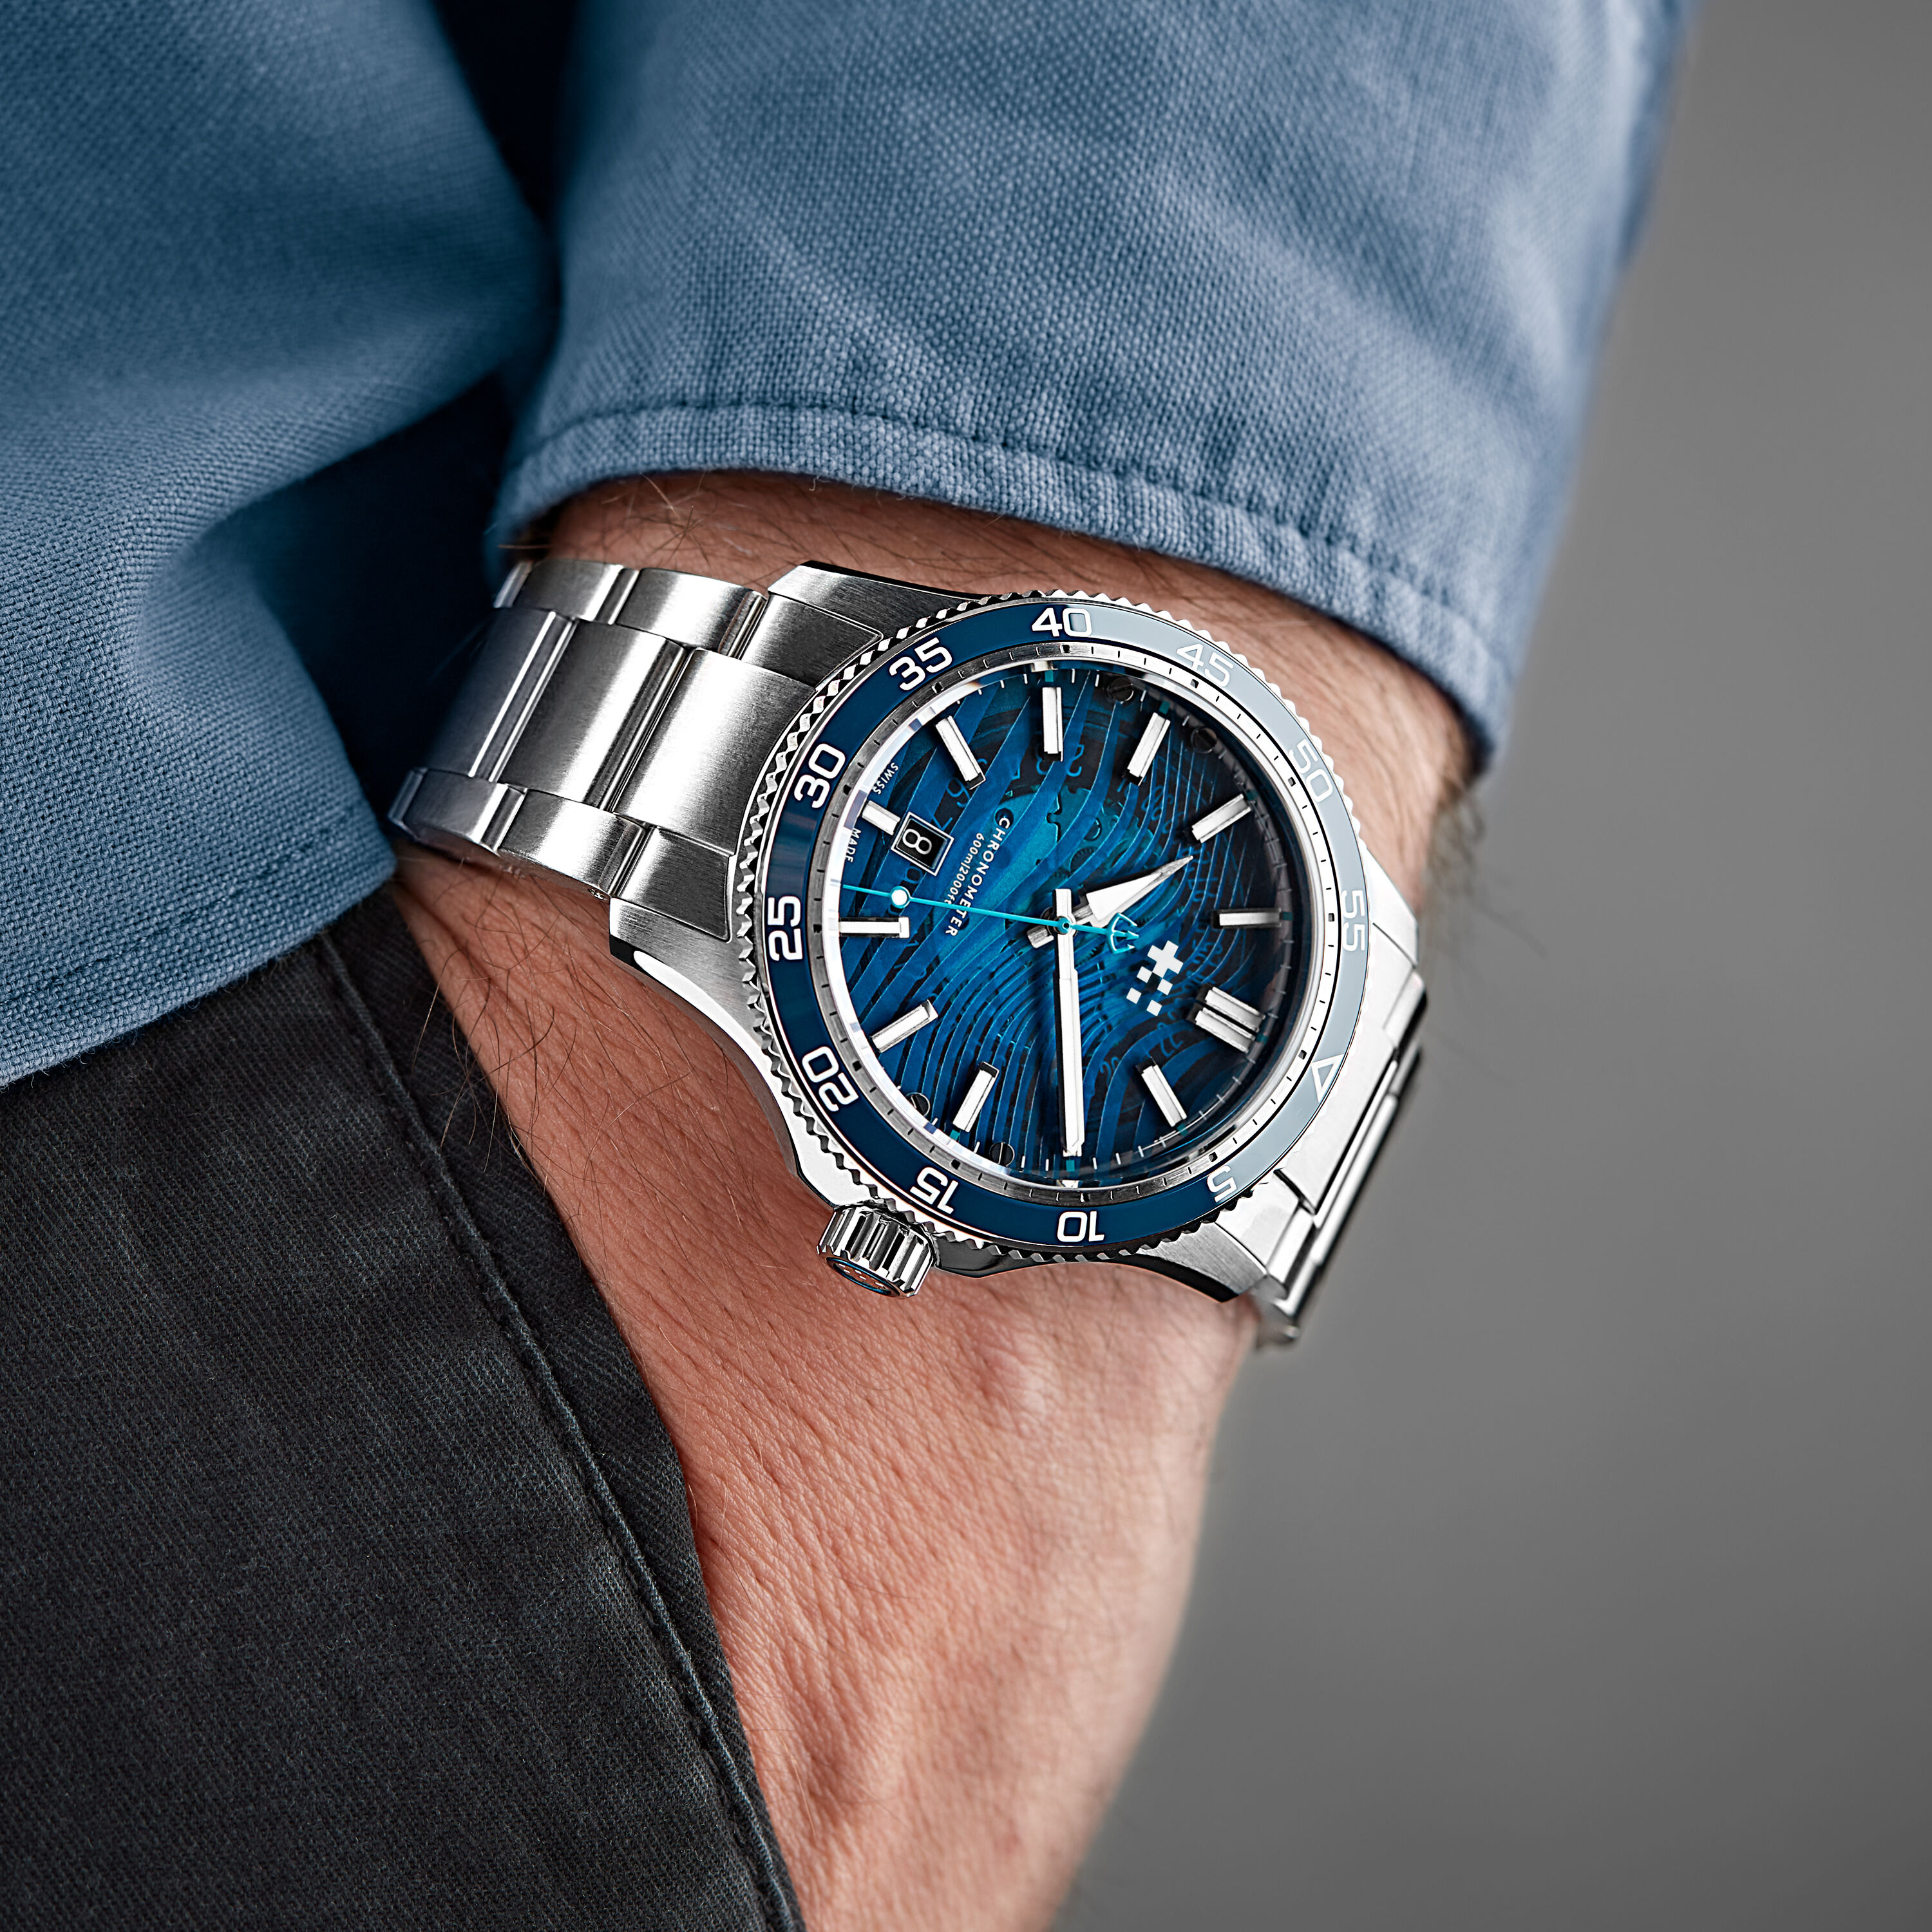 Watch Review: Christopher Ward C60 Trident Pro 300 | aBlogtoWatch